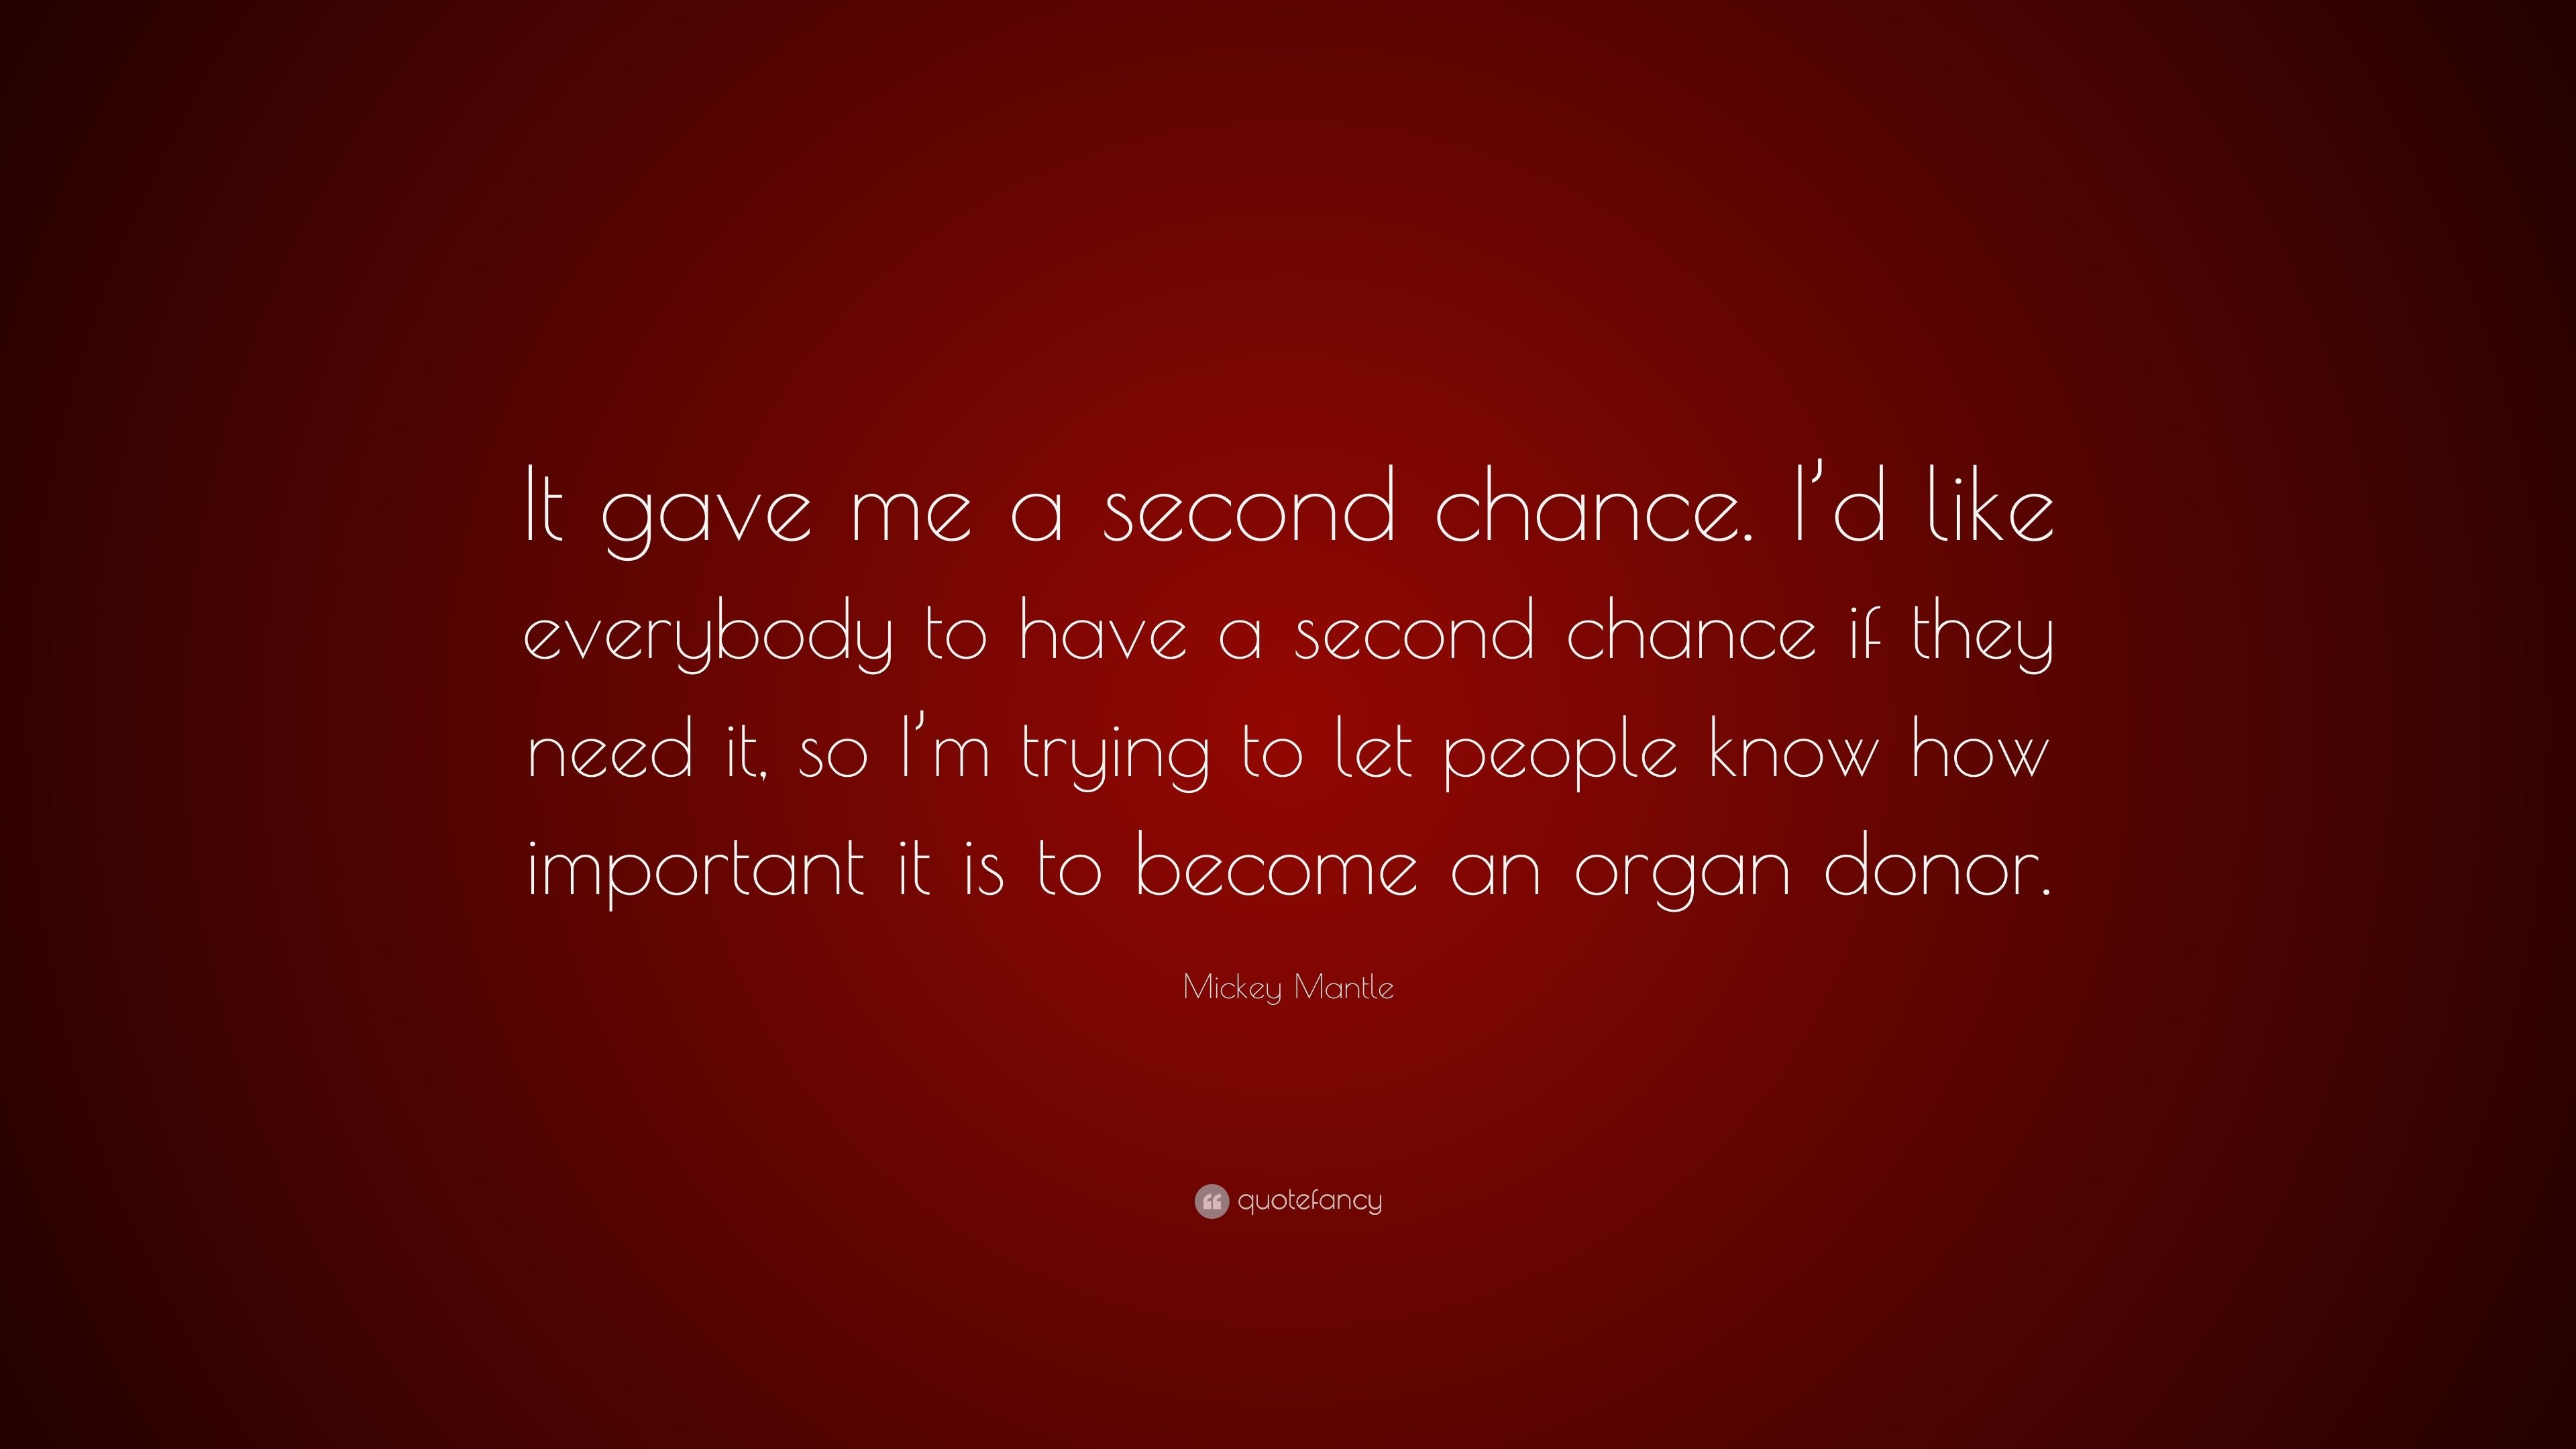 Mickey Mantle Quote: “It gave me a second chance. I'd like